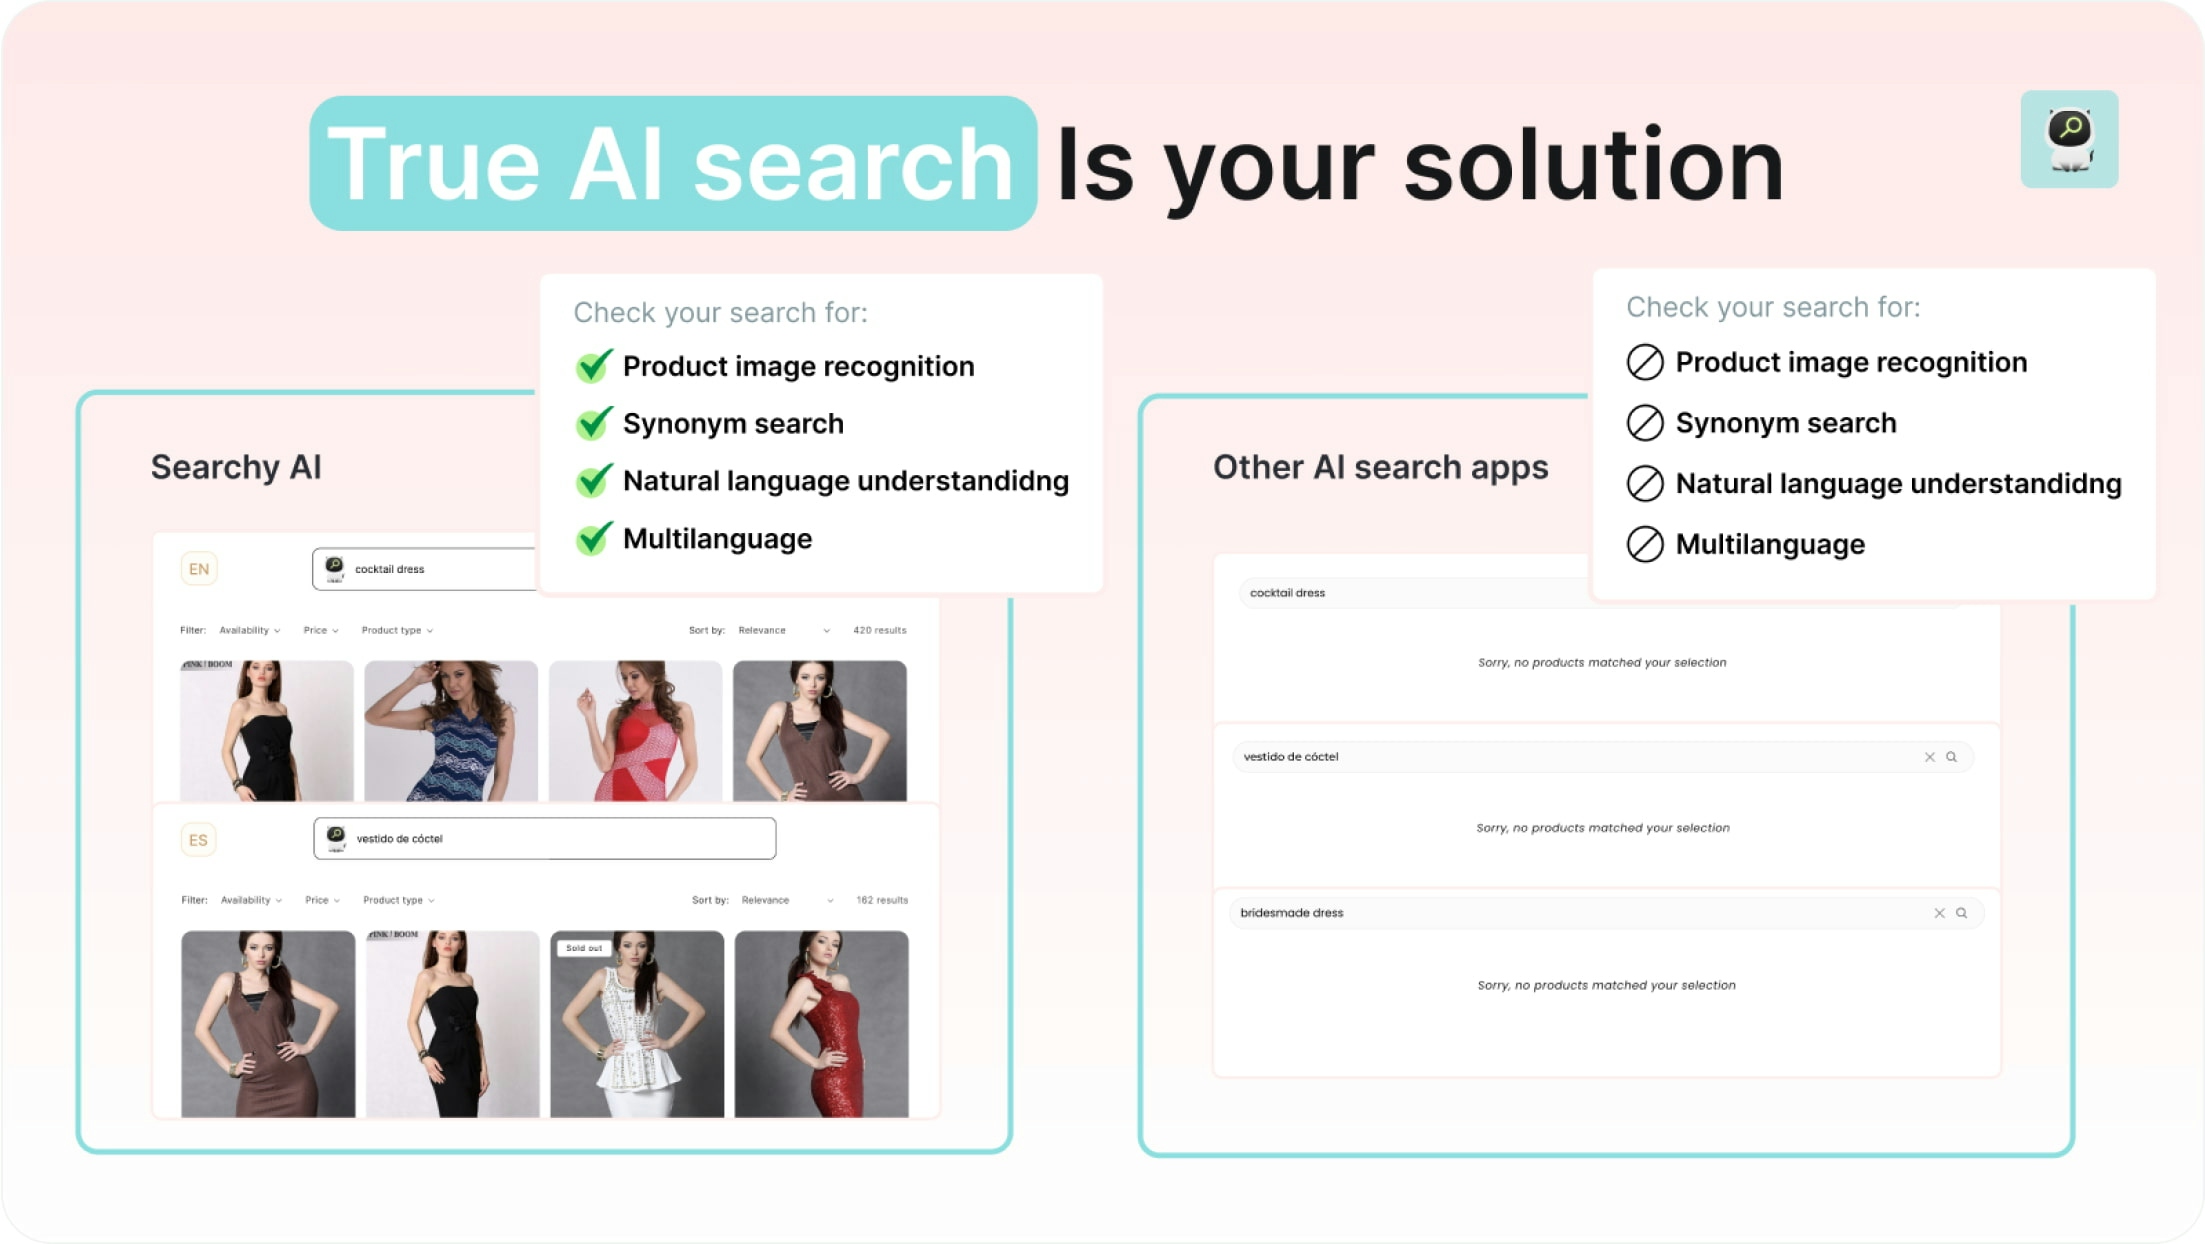 True AI search Is your solution